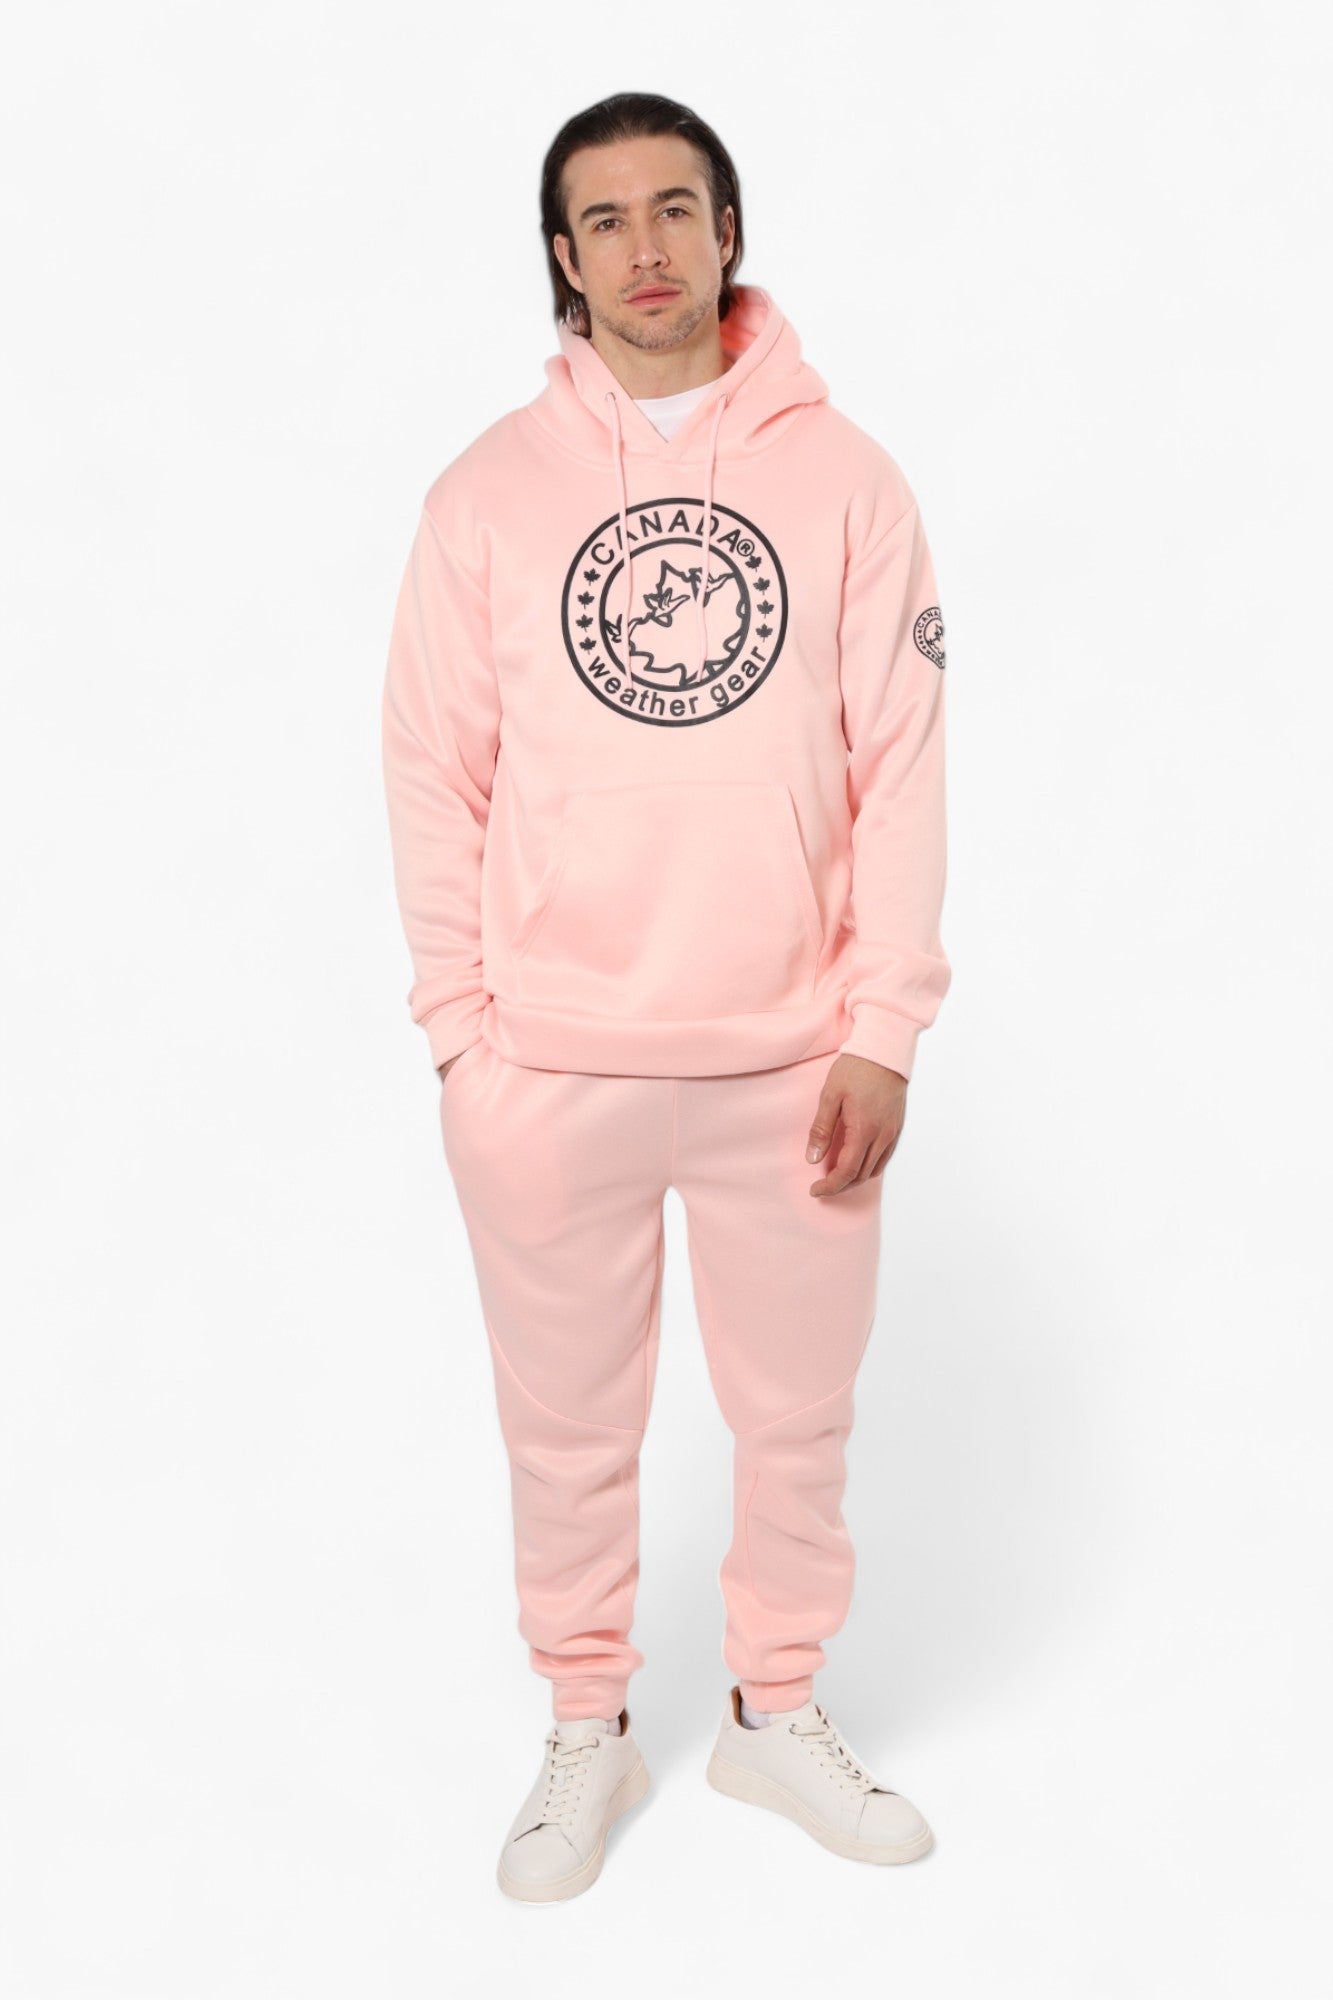 Canada Weather Gear Solid Centre Logo Hoodie - Pink - Mens Hoodies & Sweatshirts - Canada Weather Gear